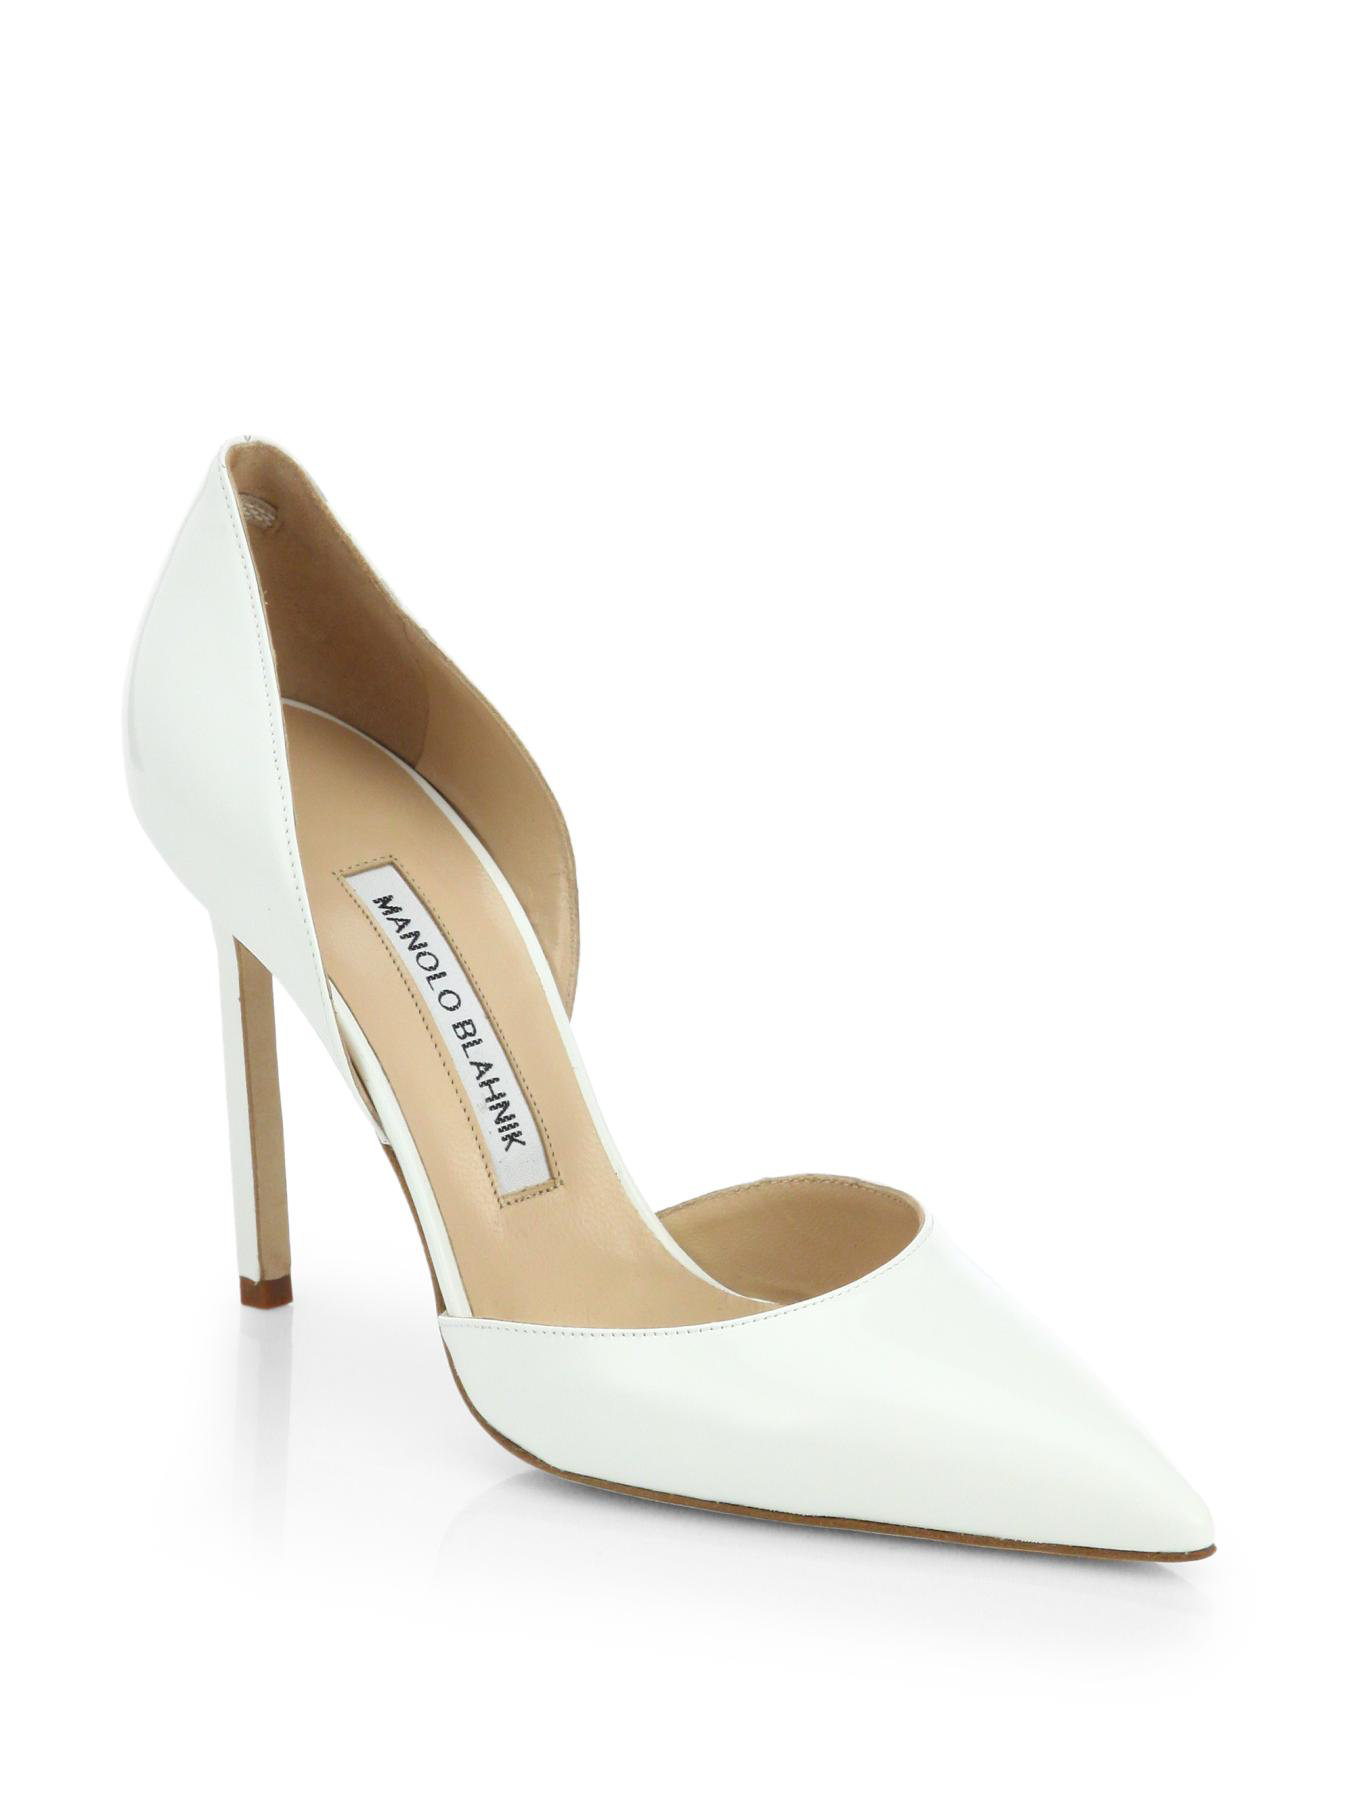 Manolo Blahnik Tayler Patent Leather D'orsay Pumps in White - Lyst